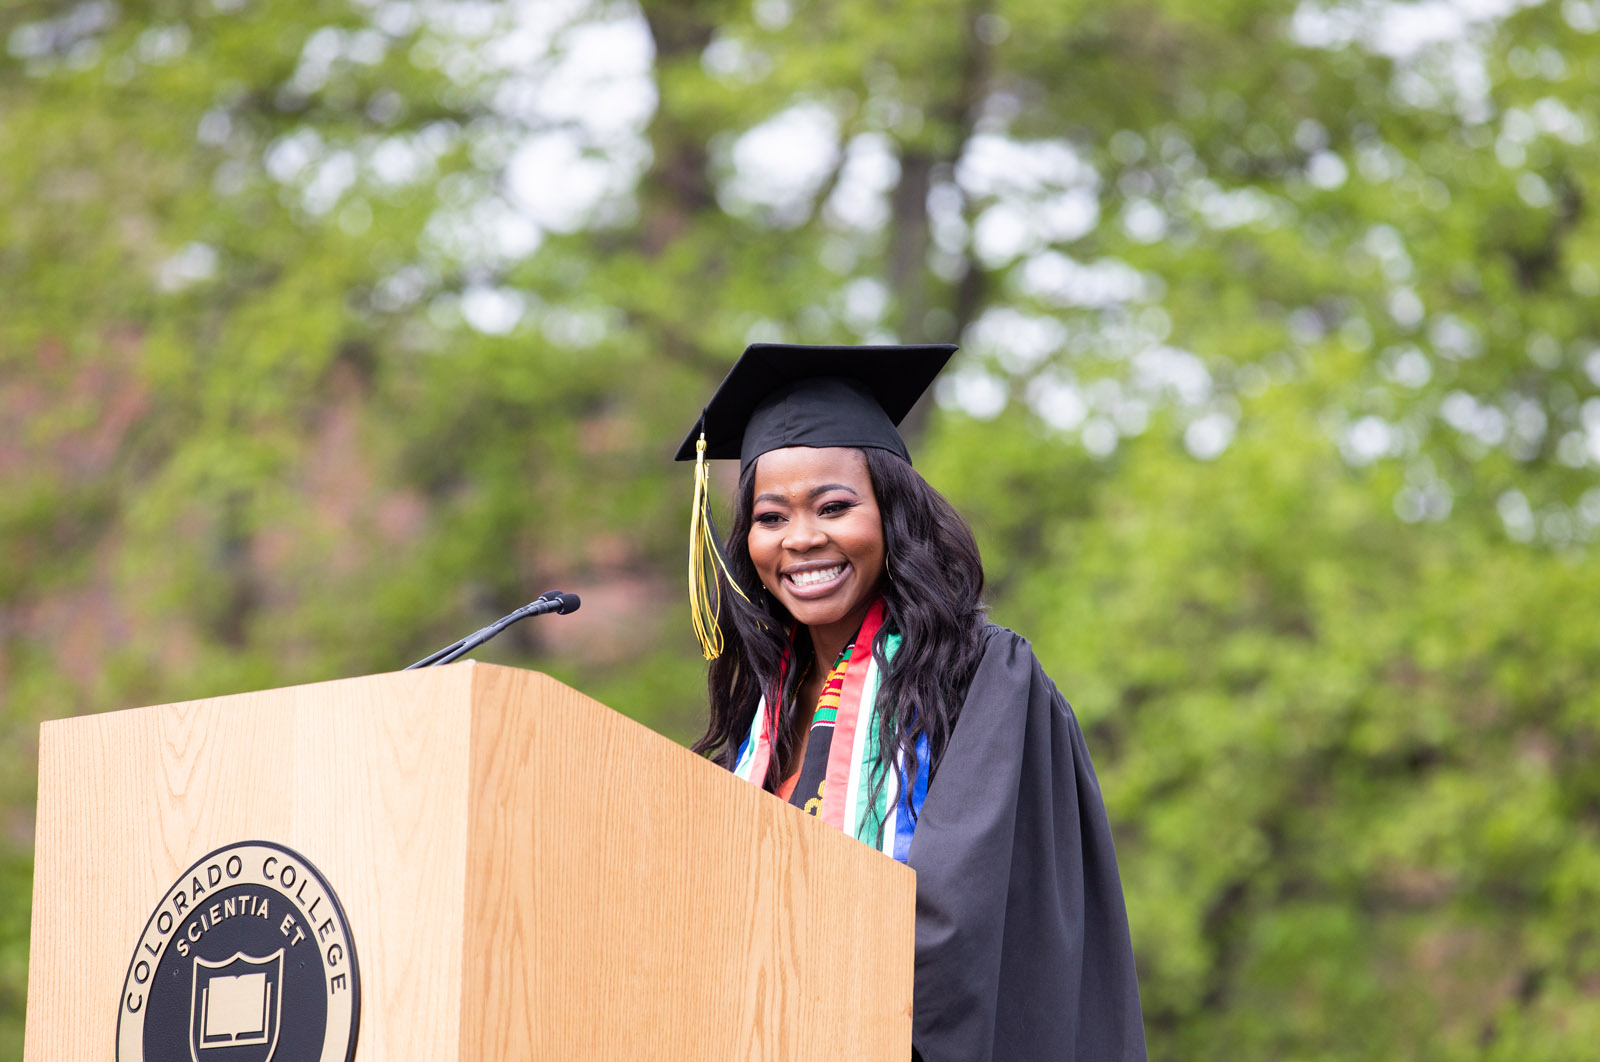 <strong>Palesa Mokoena ’19</strong> introduced commencement speaker Oprah Winfrey and discussed her personal experience with Winfrey's generosity.